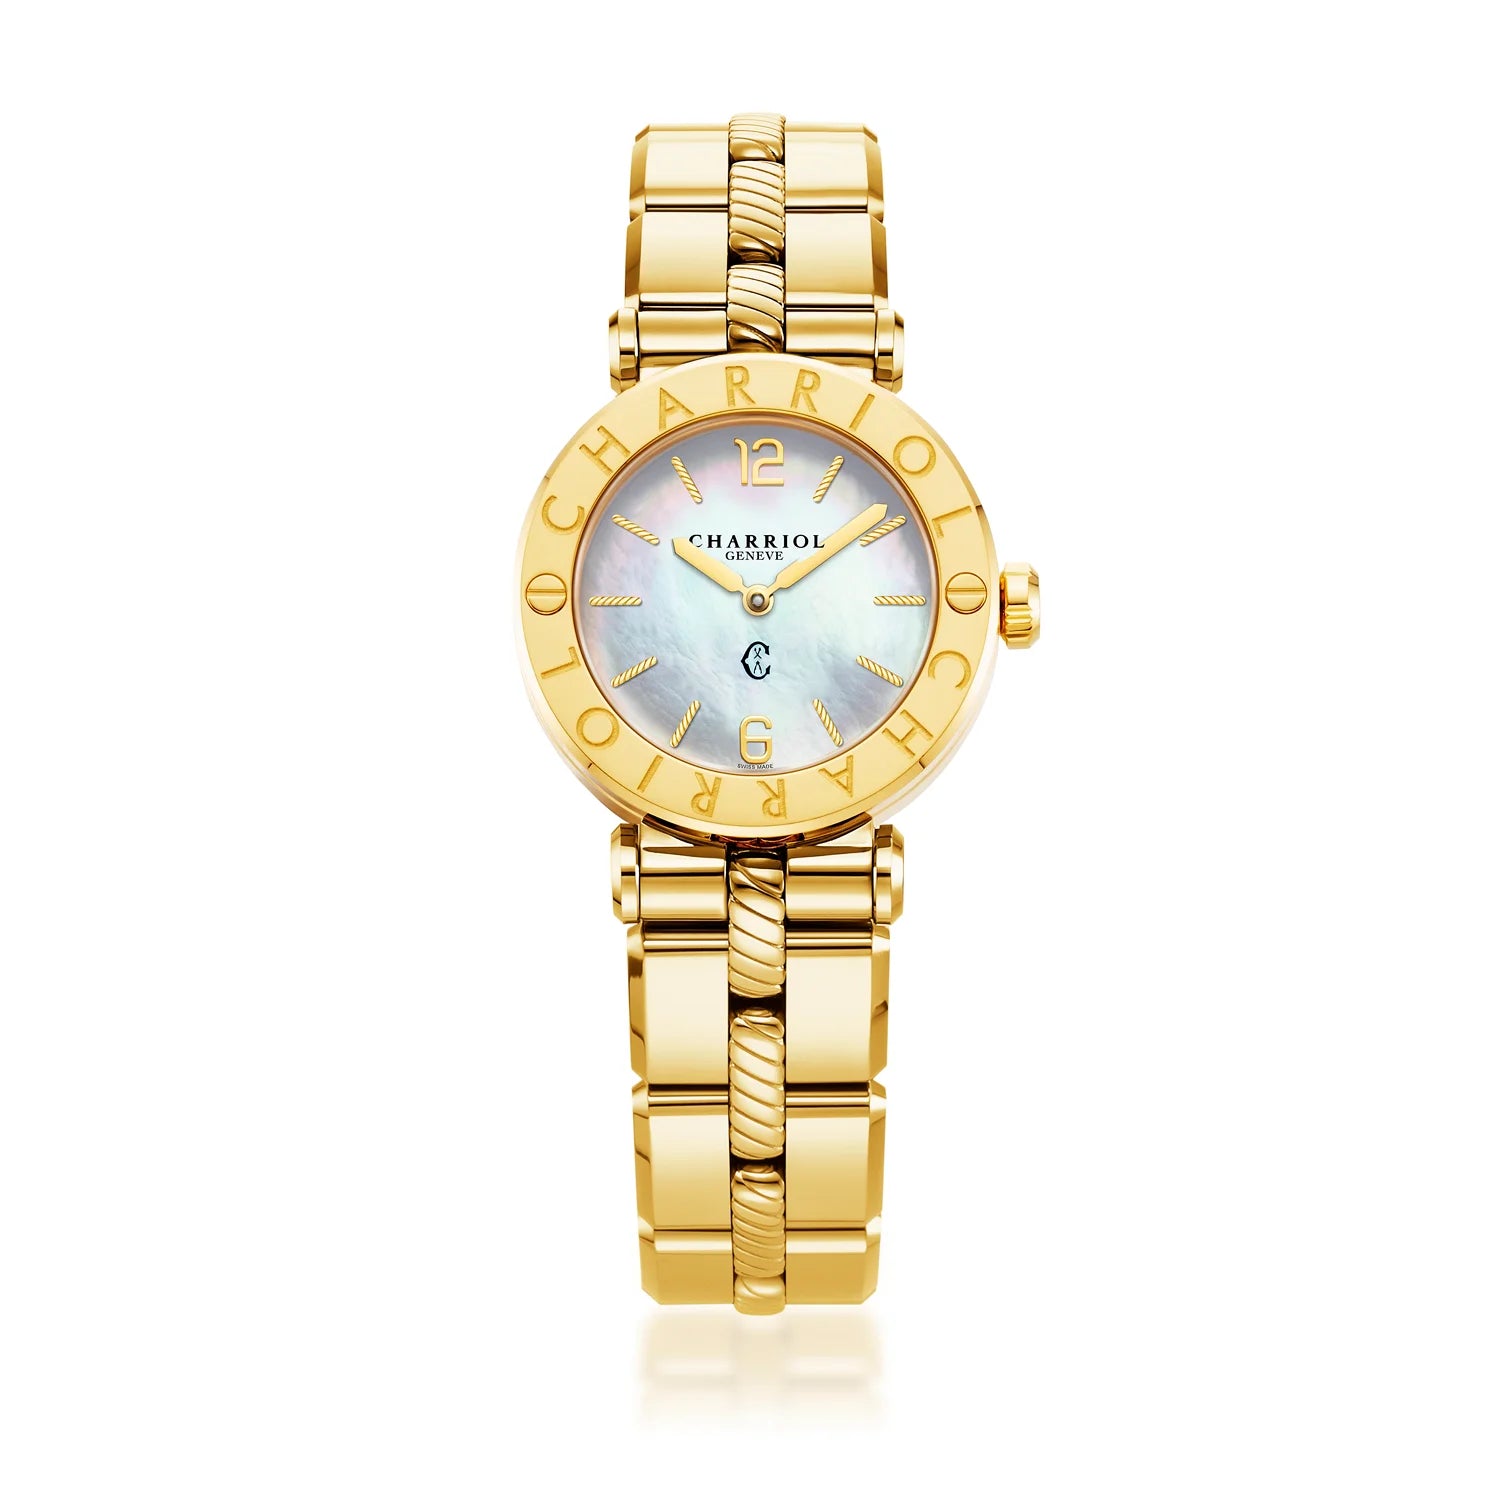 St Tropez Cruise Watch White and Yellow GoldSt Tropez Cruise 28mm Watch Yellow Gold Bracelet, Yellow Gold & 2 Screws Bezel and White MOP Dial - Charriol Geneve -  Watch